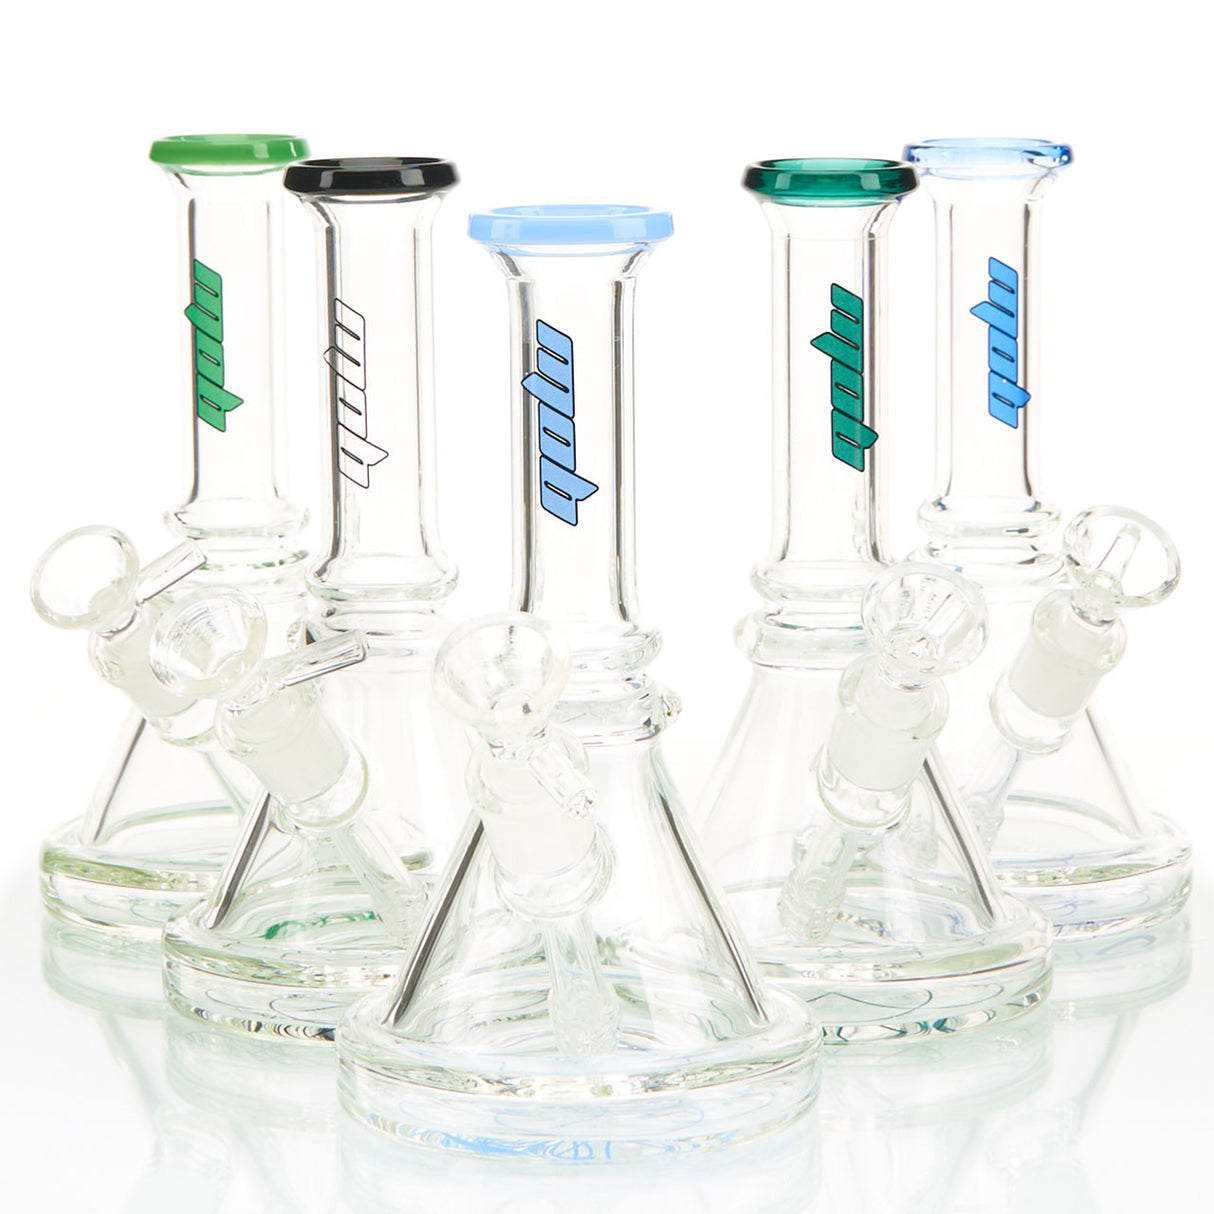 MOB Glass Bruce Beaker Base Water Pipe Approx. 7 inches all with a wide rimmed color accented base and mouthpiece Colors Blue, Green, Black, Forest, Aqua